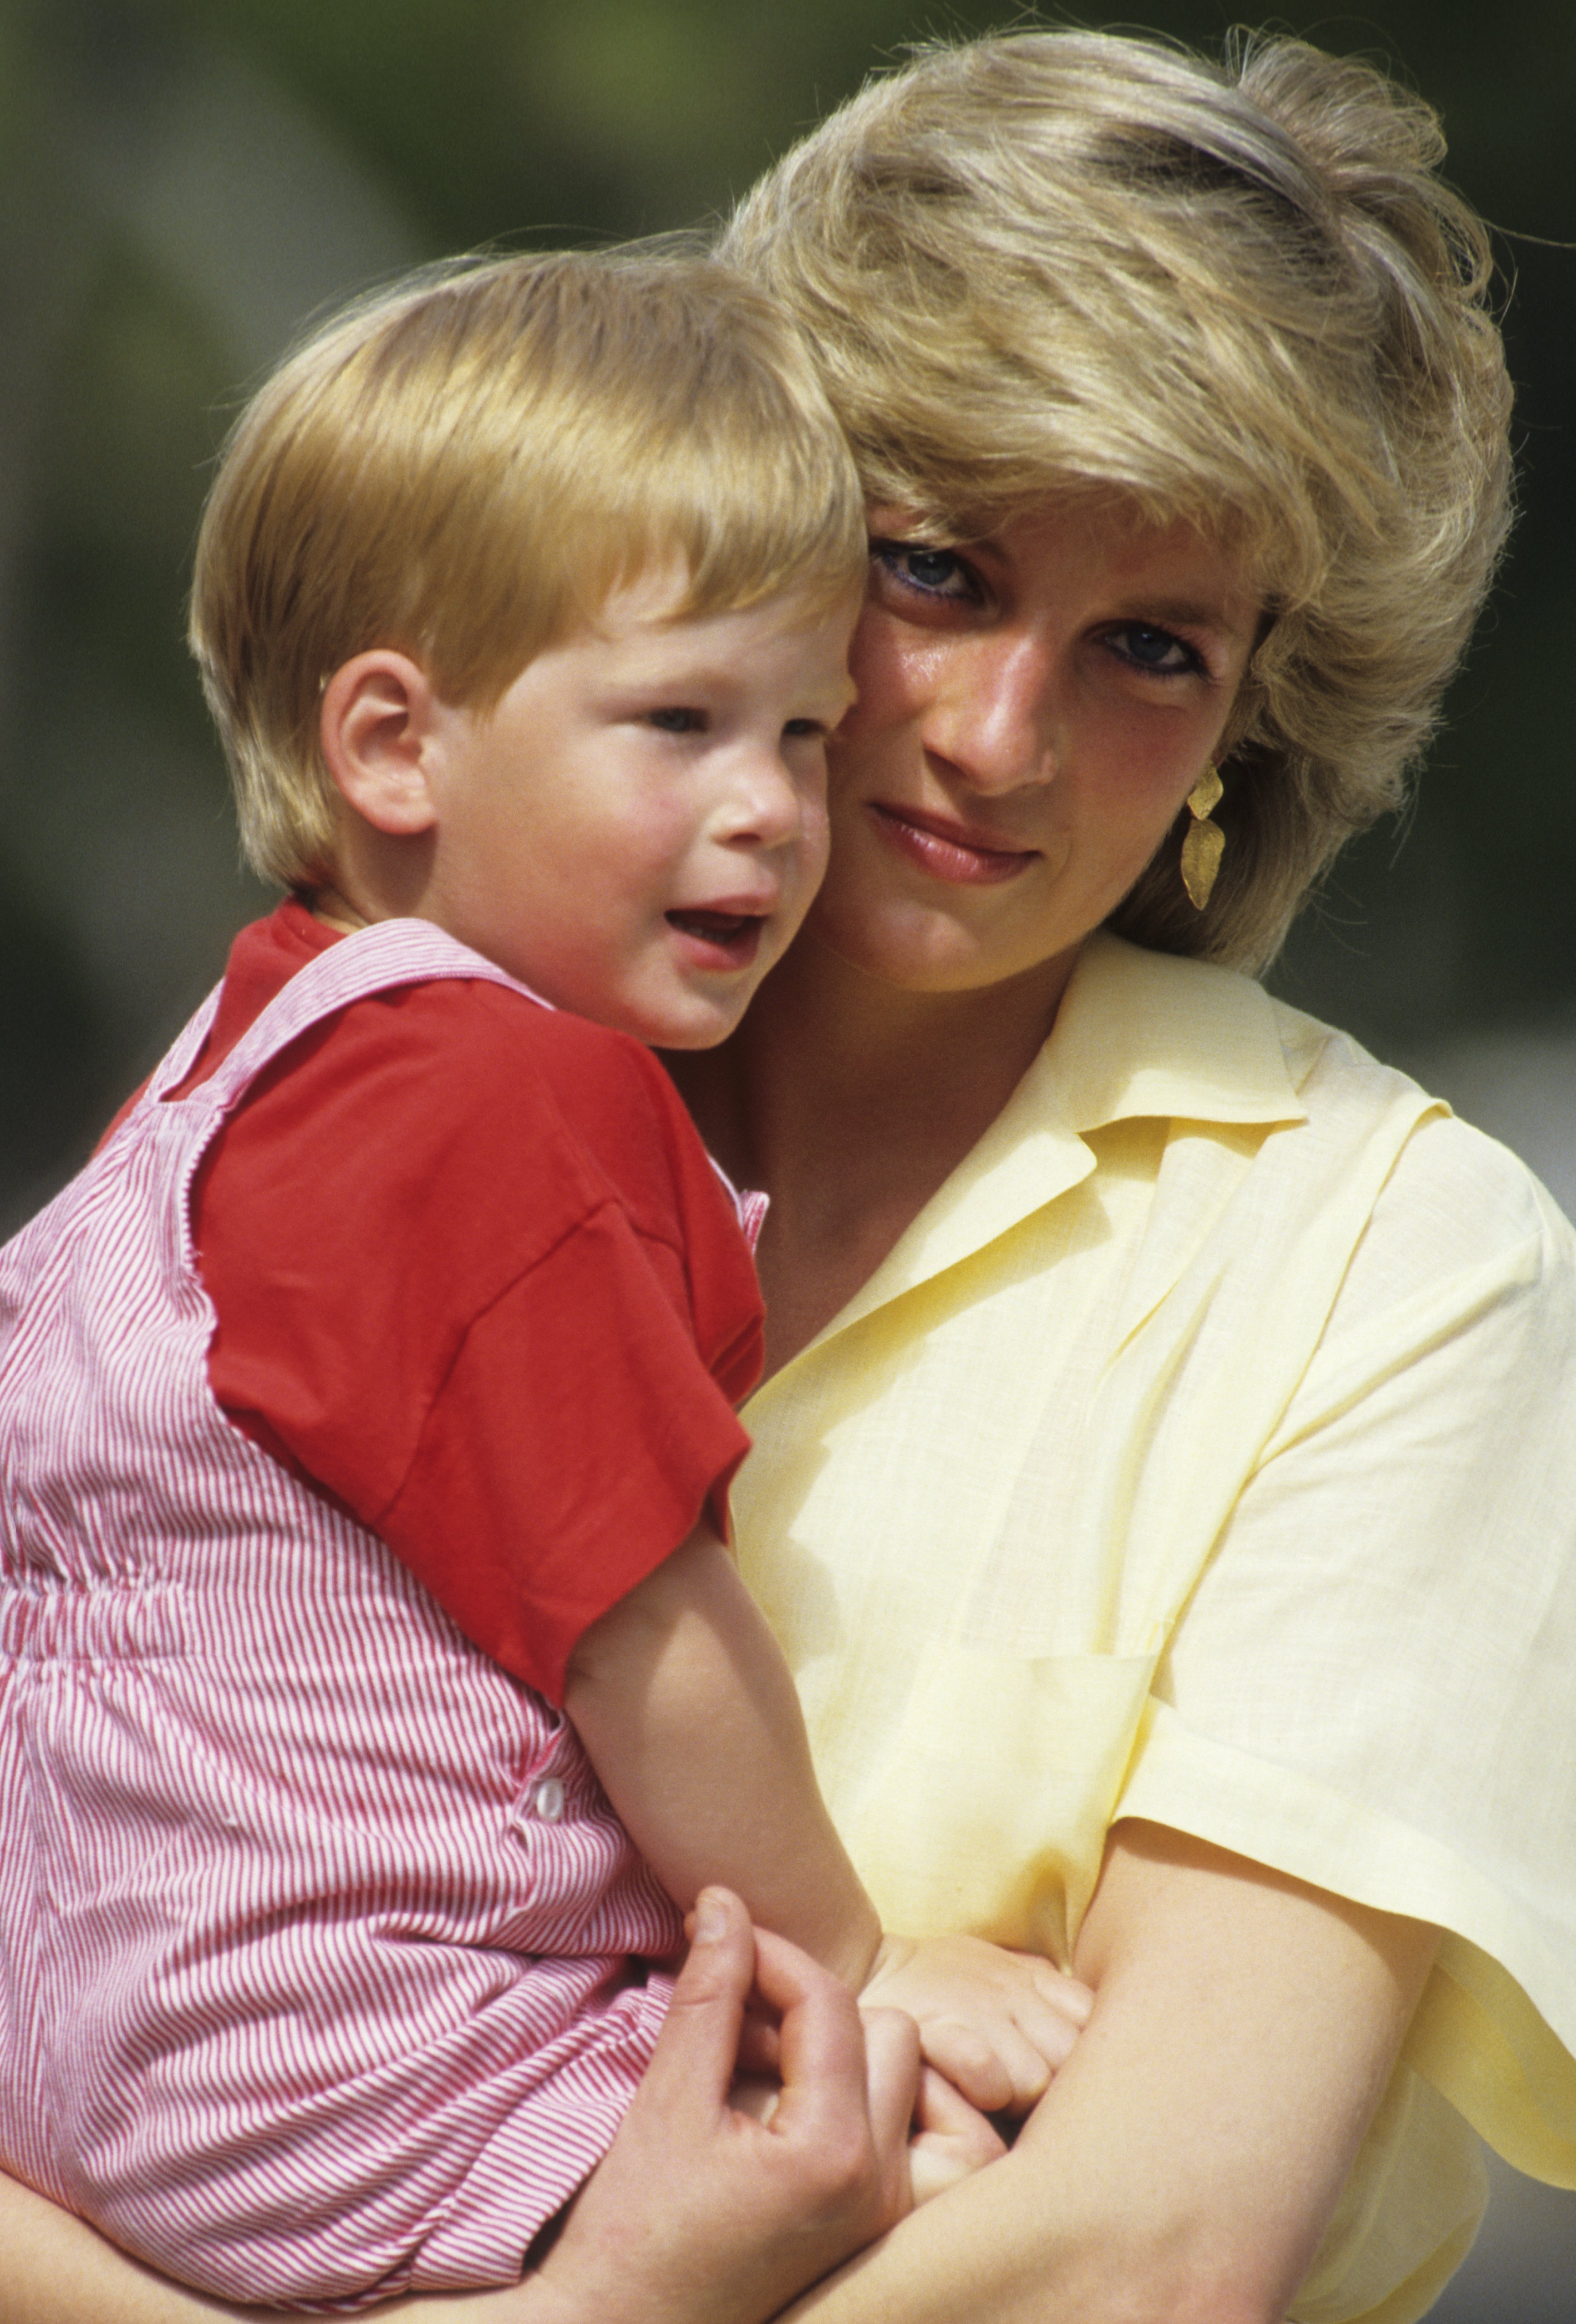 Diana, Princess of Wales with Prince Harry on holiday in Majorca, Spain on August 10, 1987. | Source: Getty Images